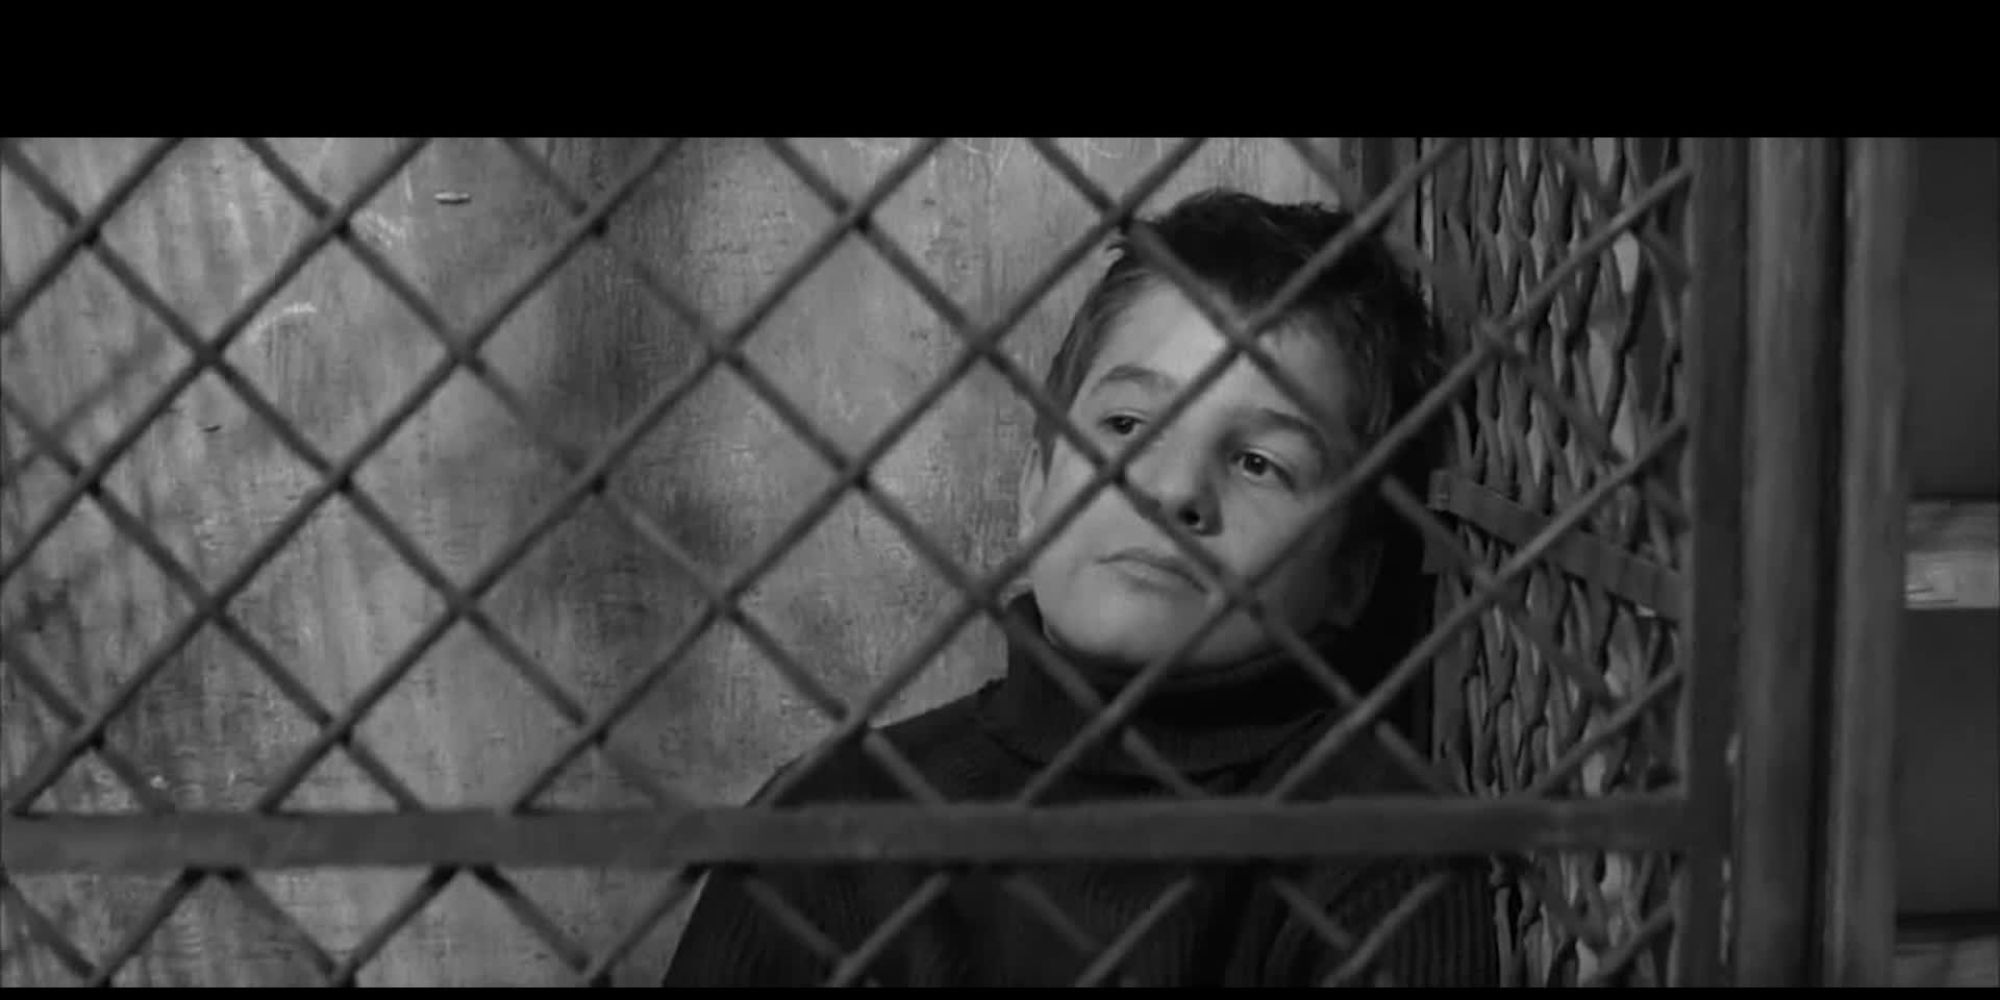 An image from the movie The 400 Blows (1959).